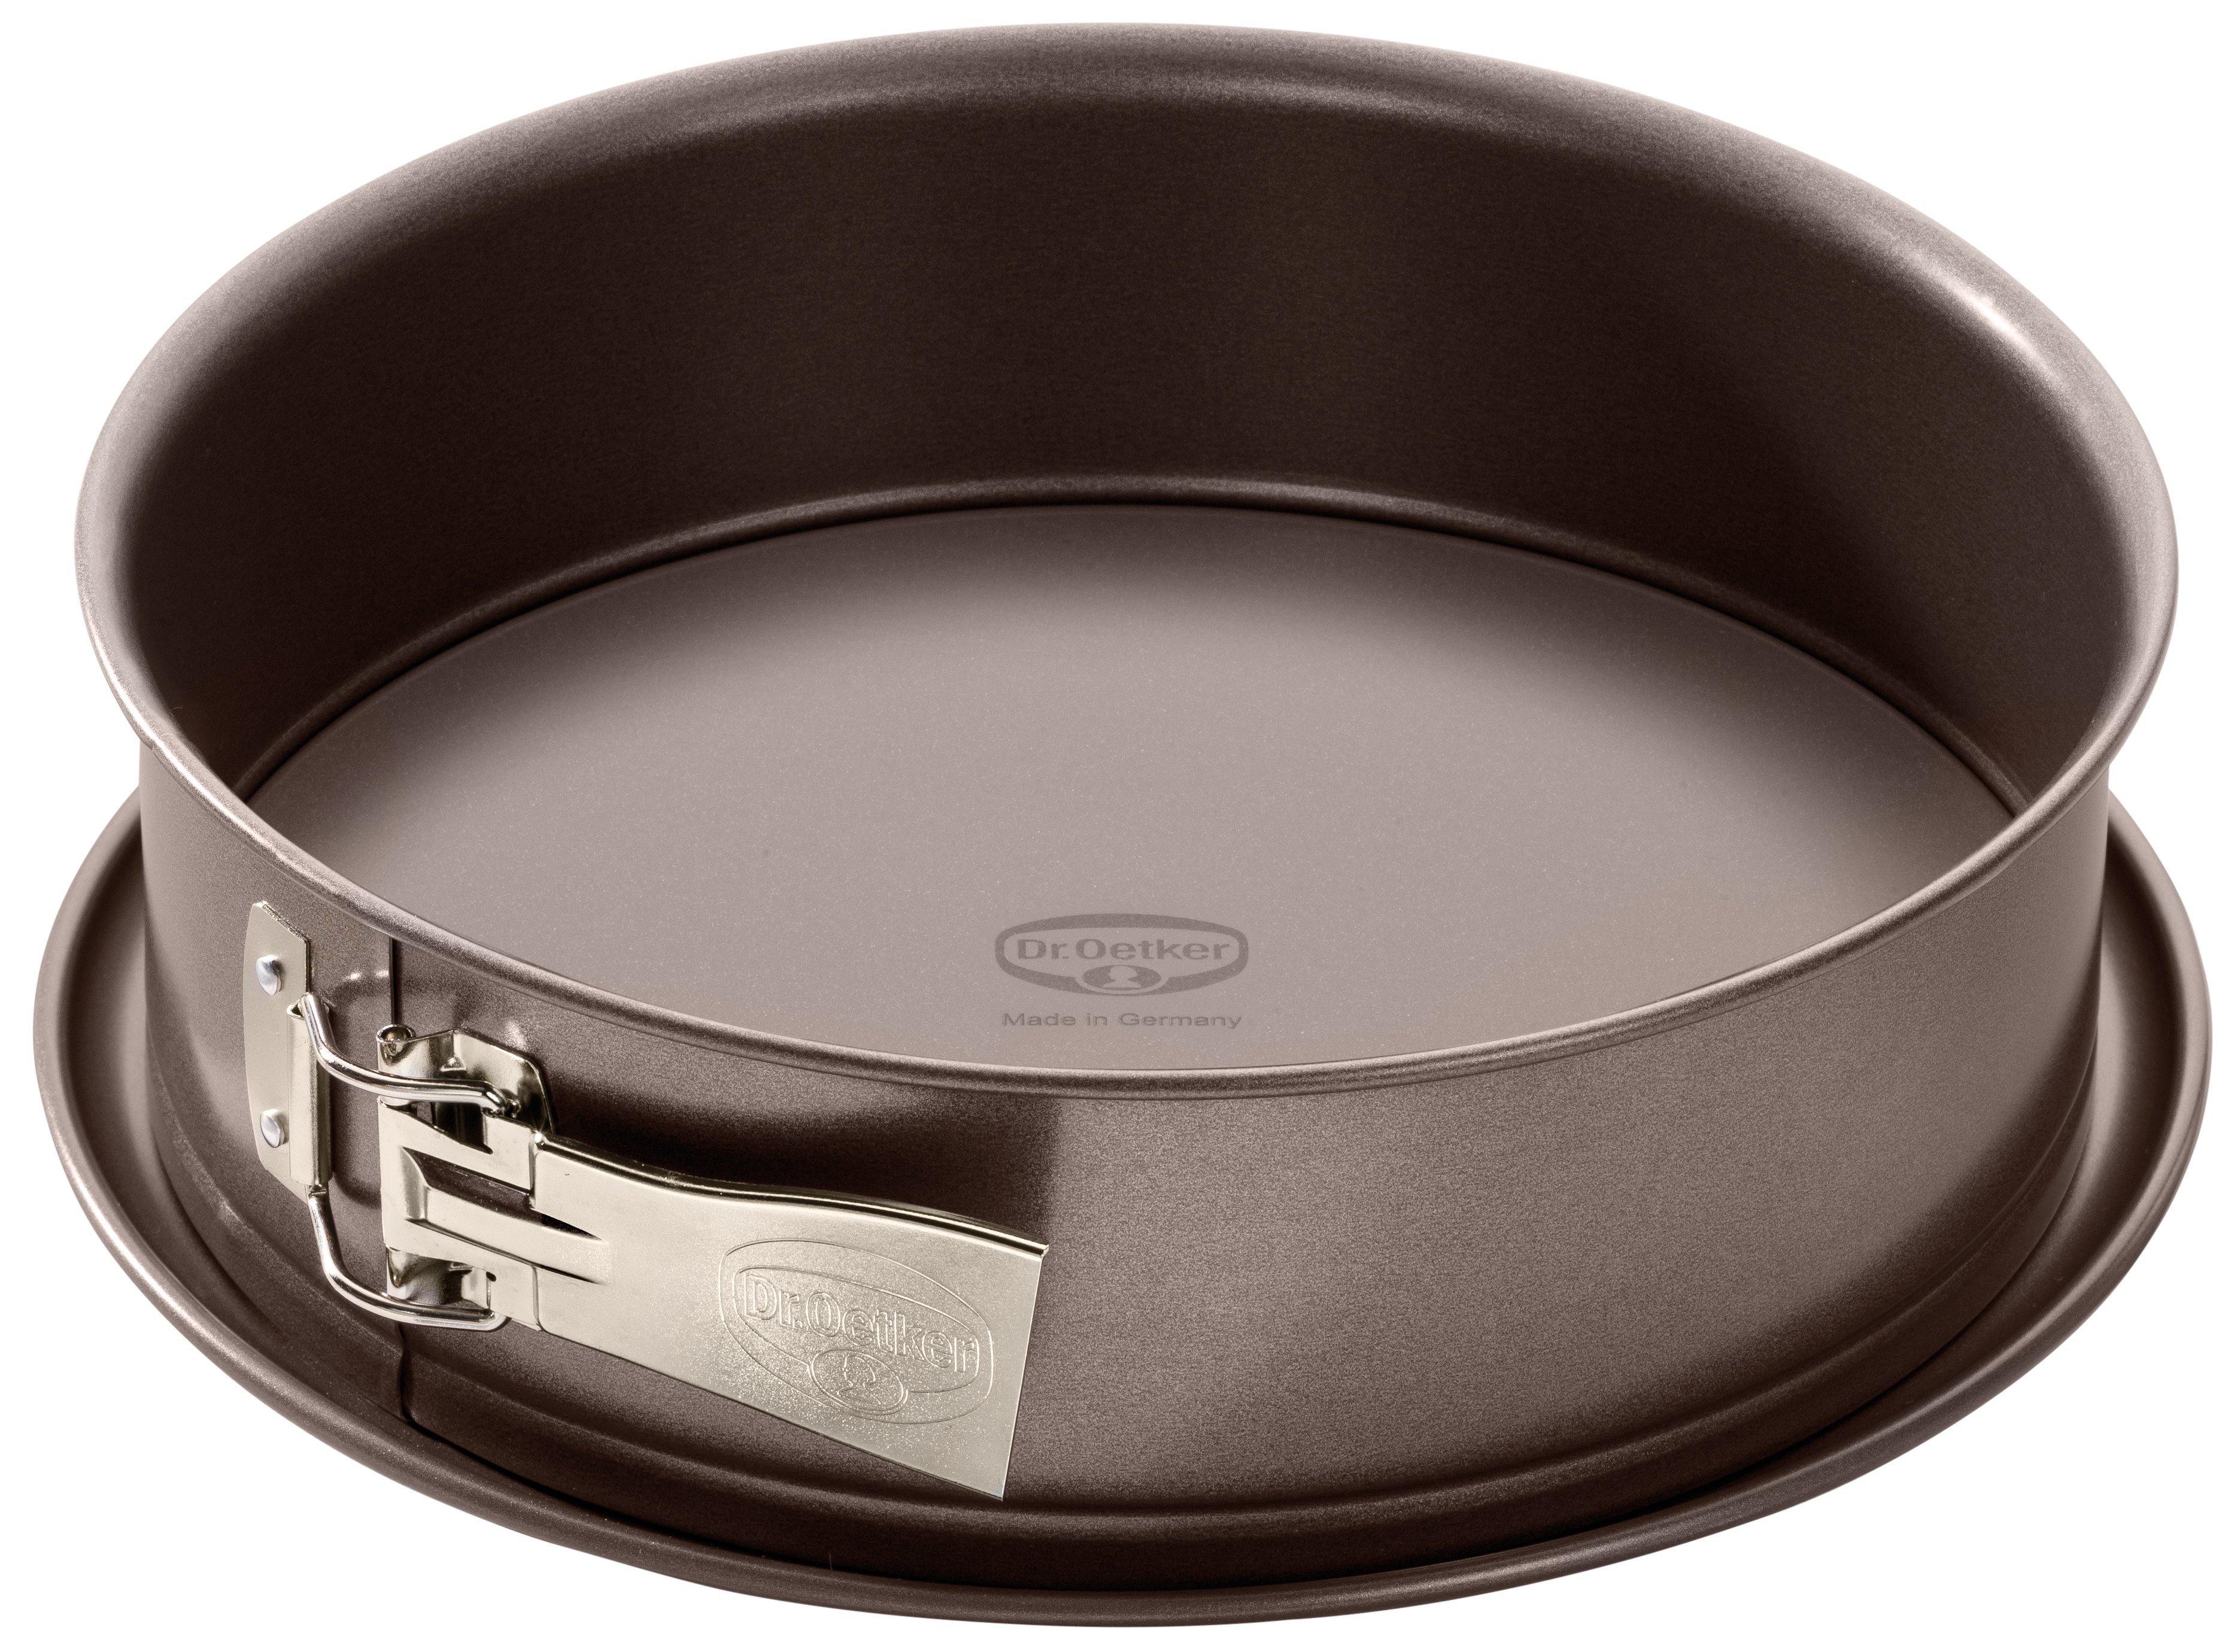 Dr. Oetker "Back-Edition" Springform Pan With Enamel Base And Non-Stick Ring, Brown, 24X8 Cm - Whole and All